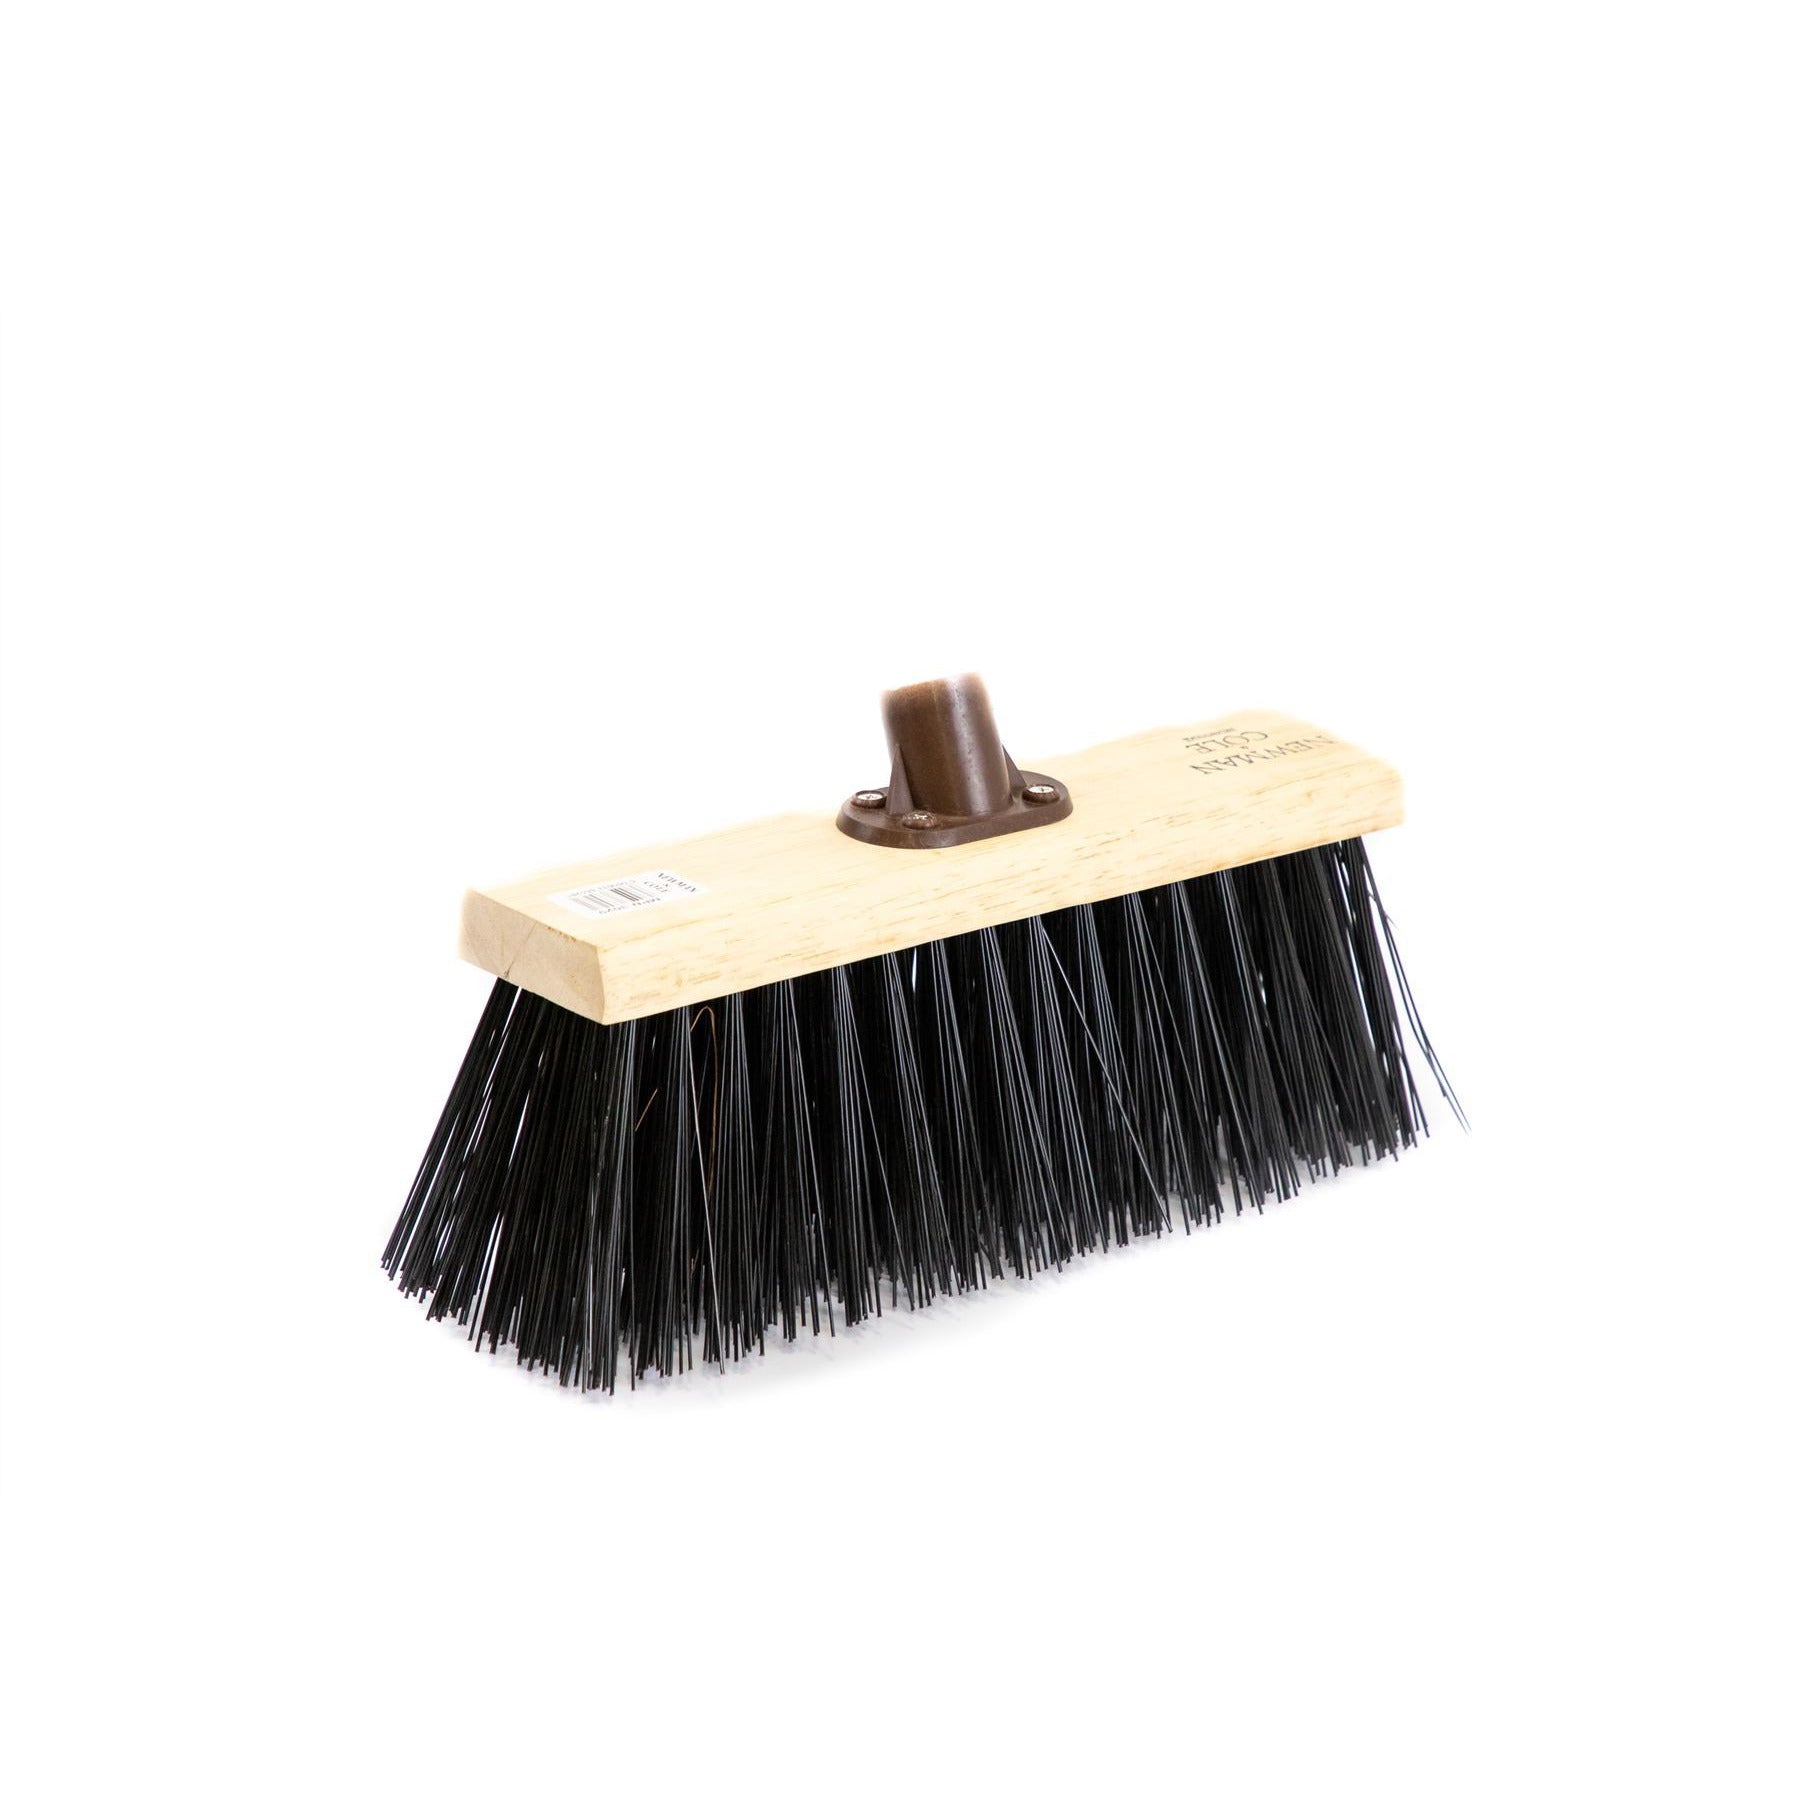 Newman and Cole 13" Synthetic Flat Broom Head with Plastic Socket - The Dustpan and Brush Store